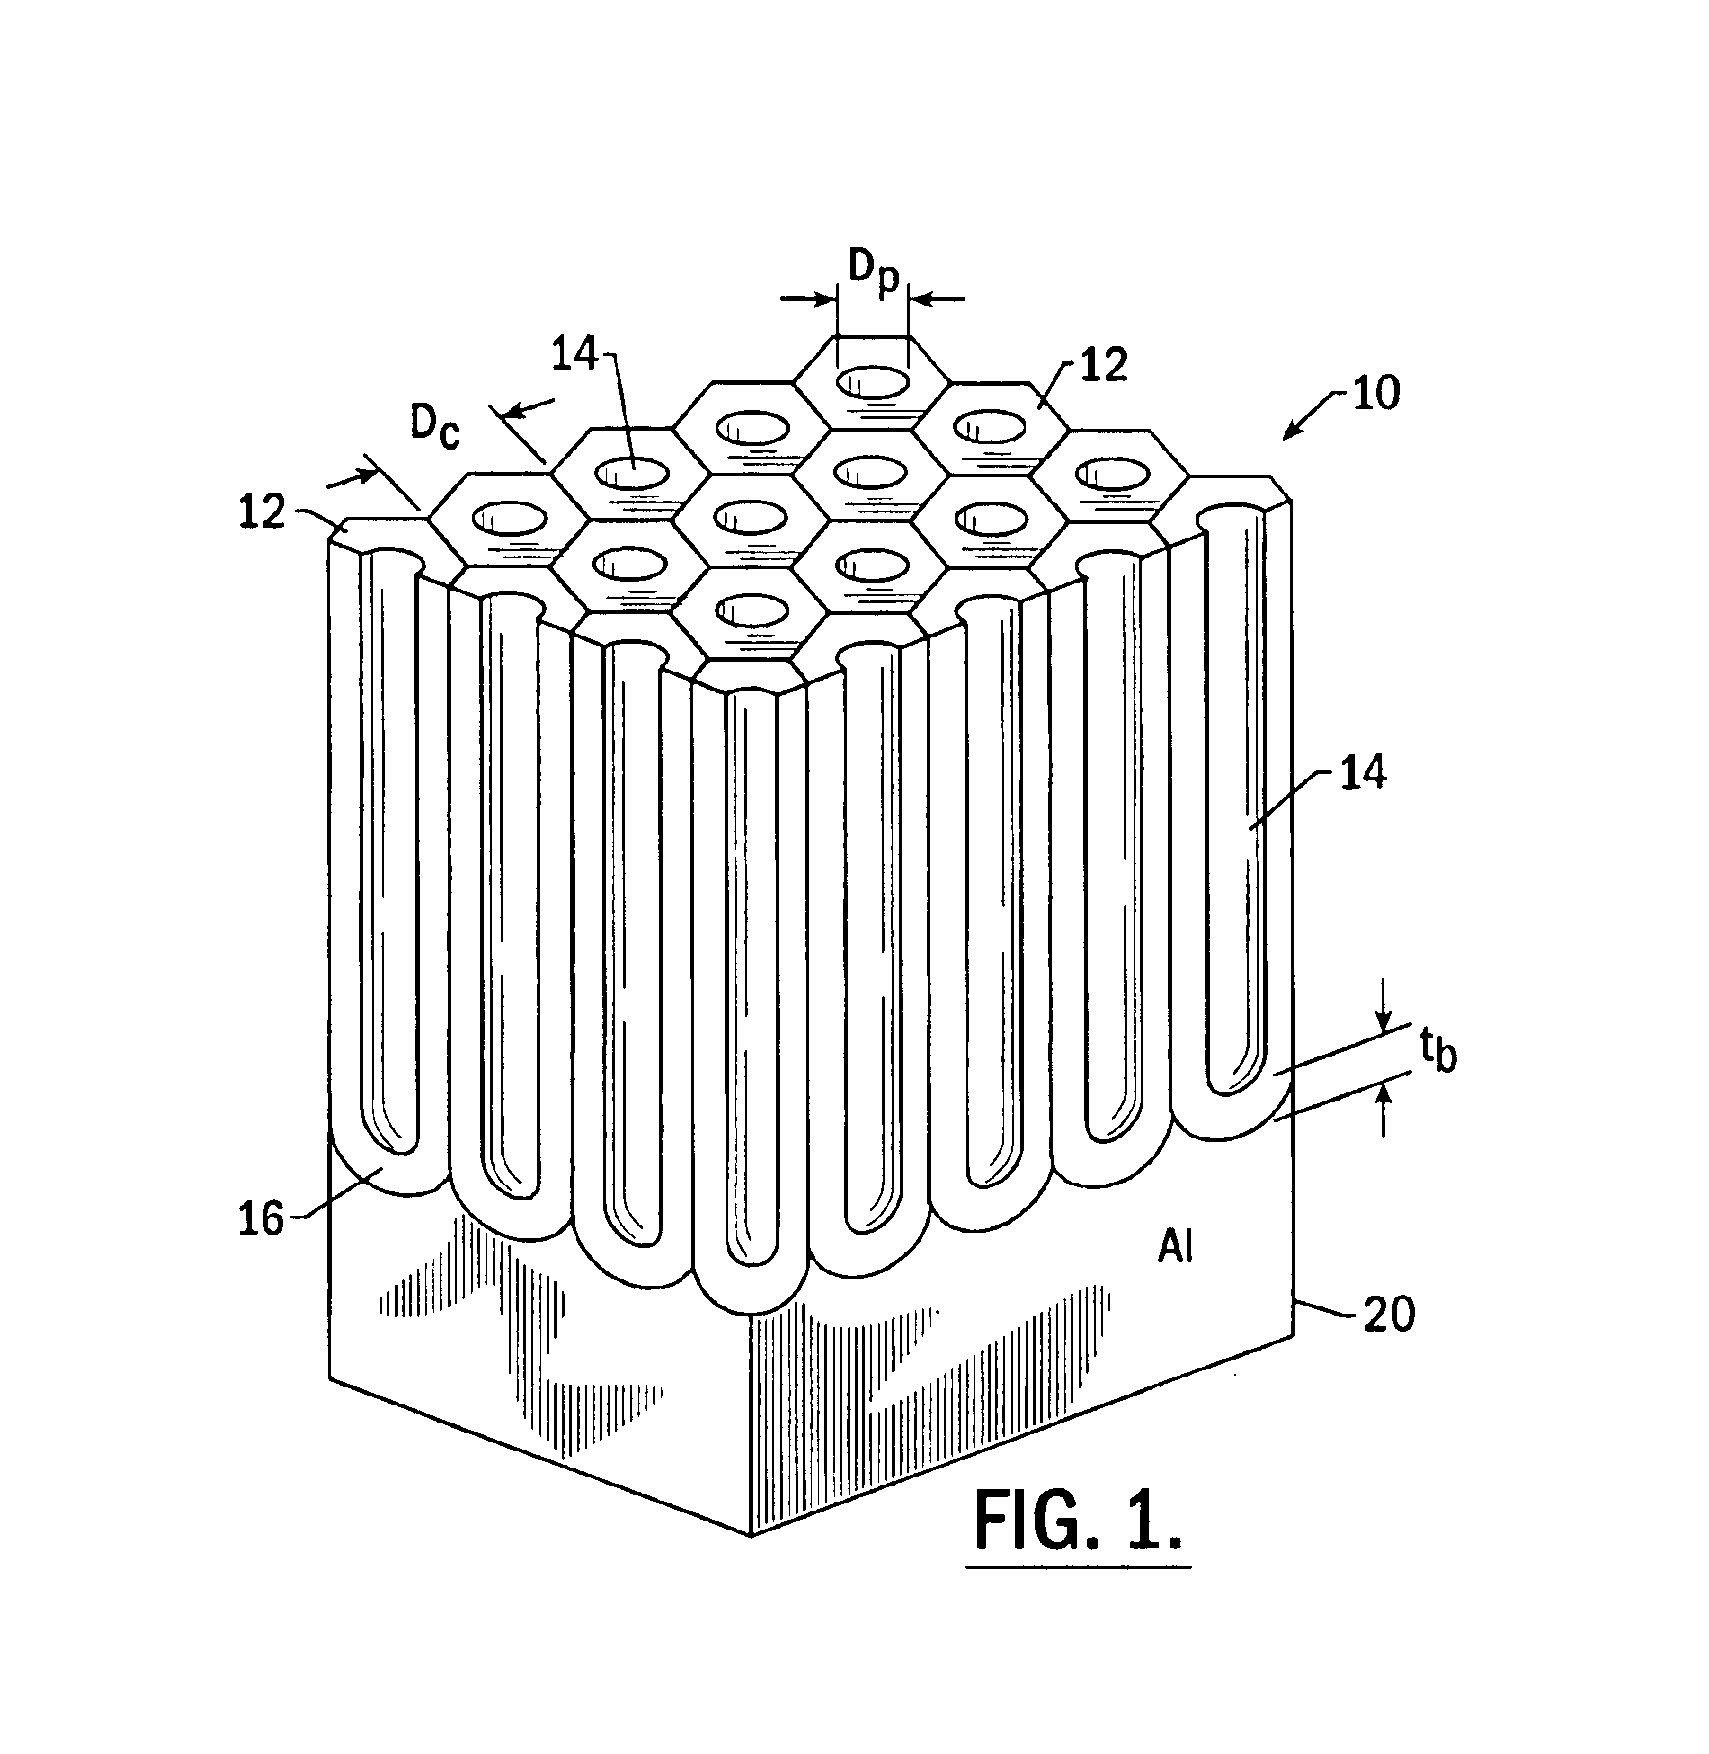 Optoelectronic devices having arrays of quantum-dot compound semiconductor superlattices therein